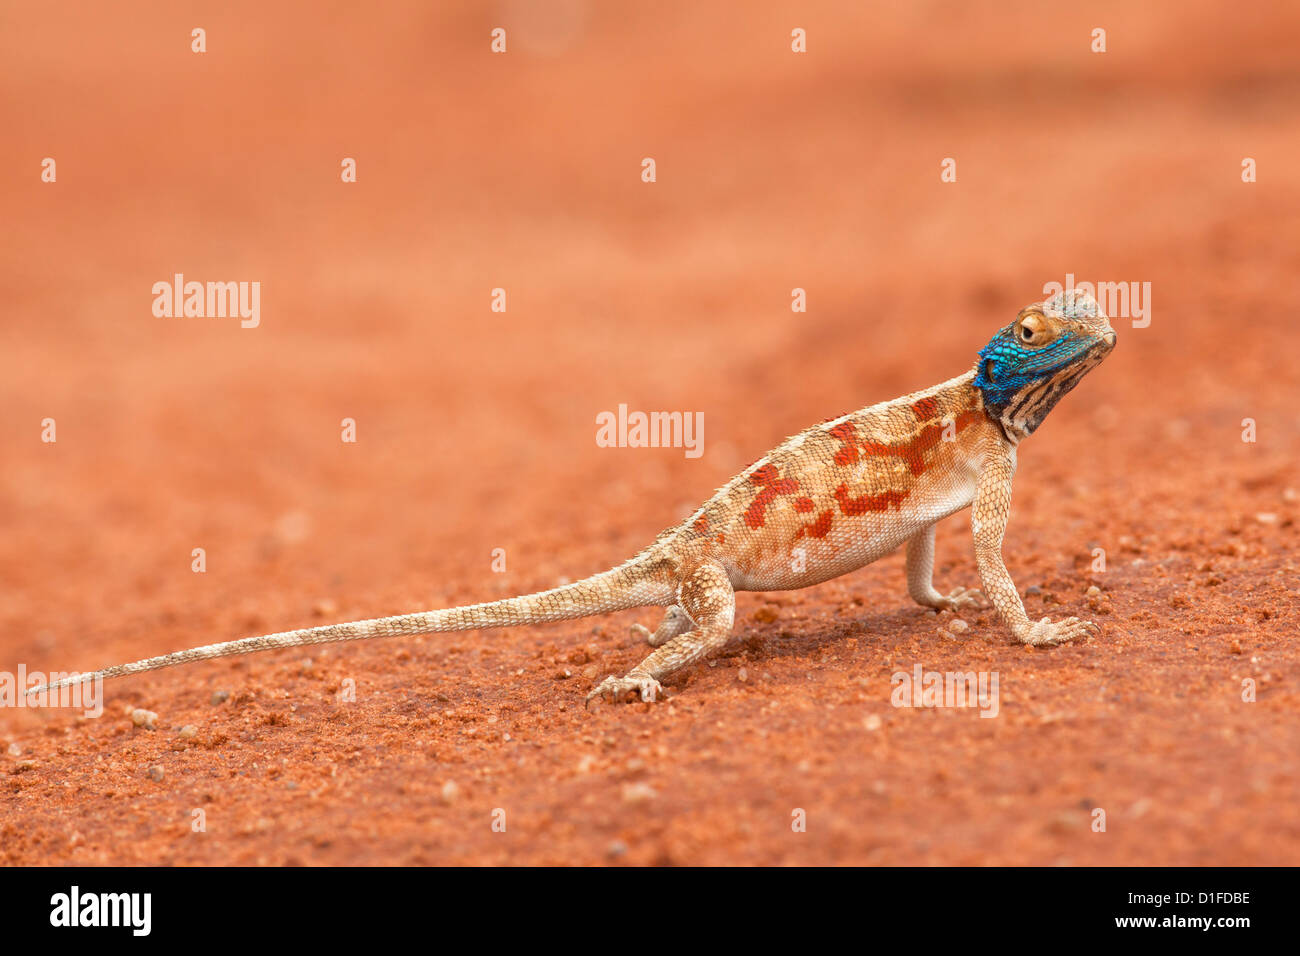 Ground agama (Agama aculeata), Kgalagadi Transfrontier Park, Northern Cape, South Africa, Africa Stock Photo